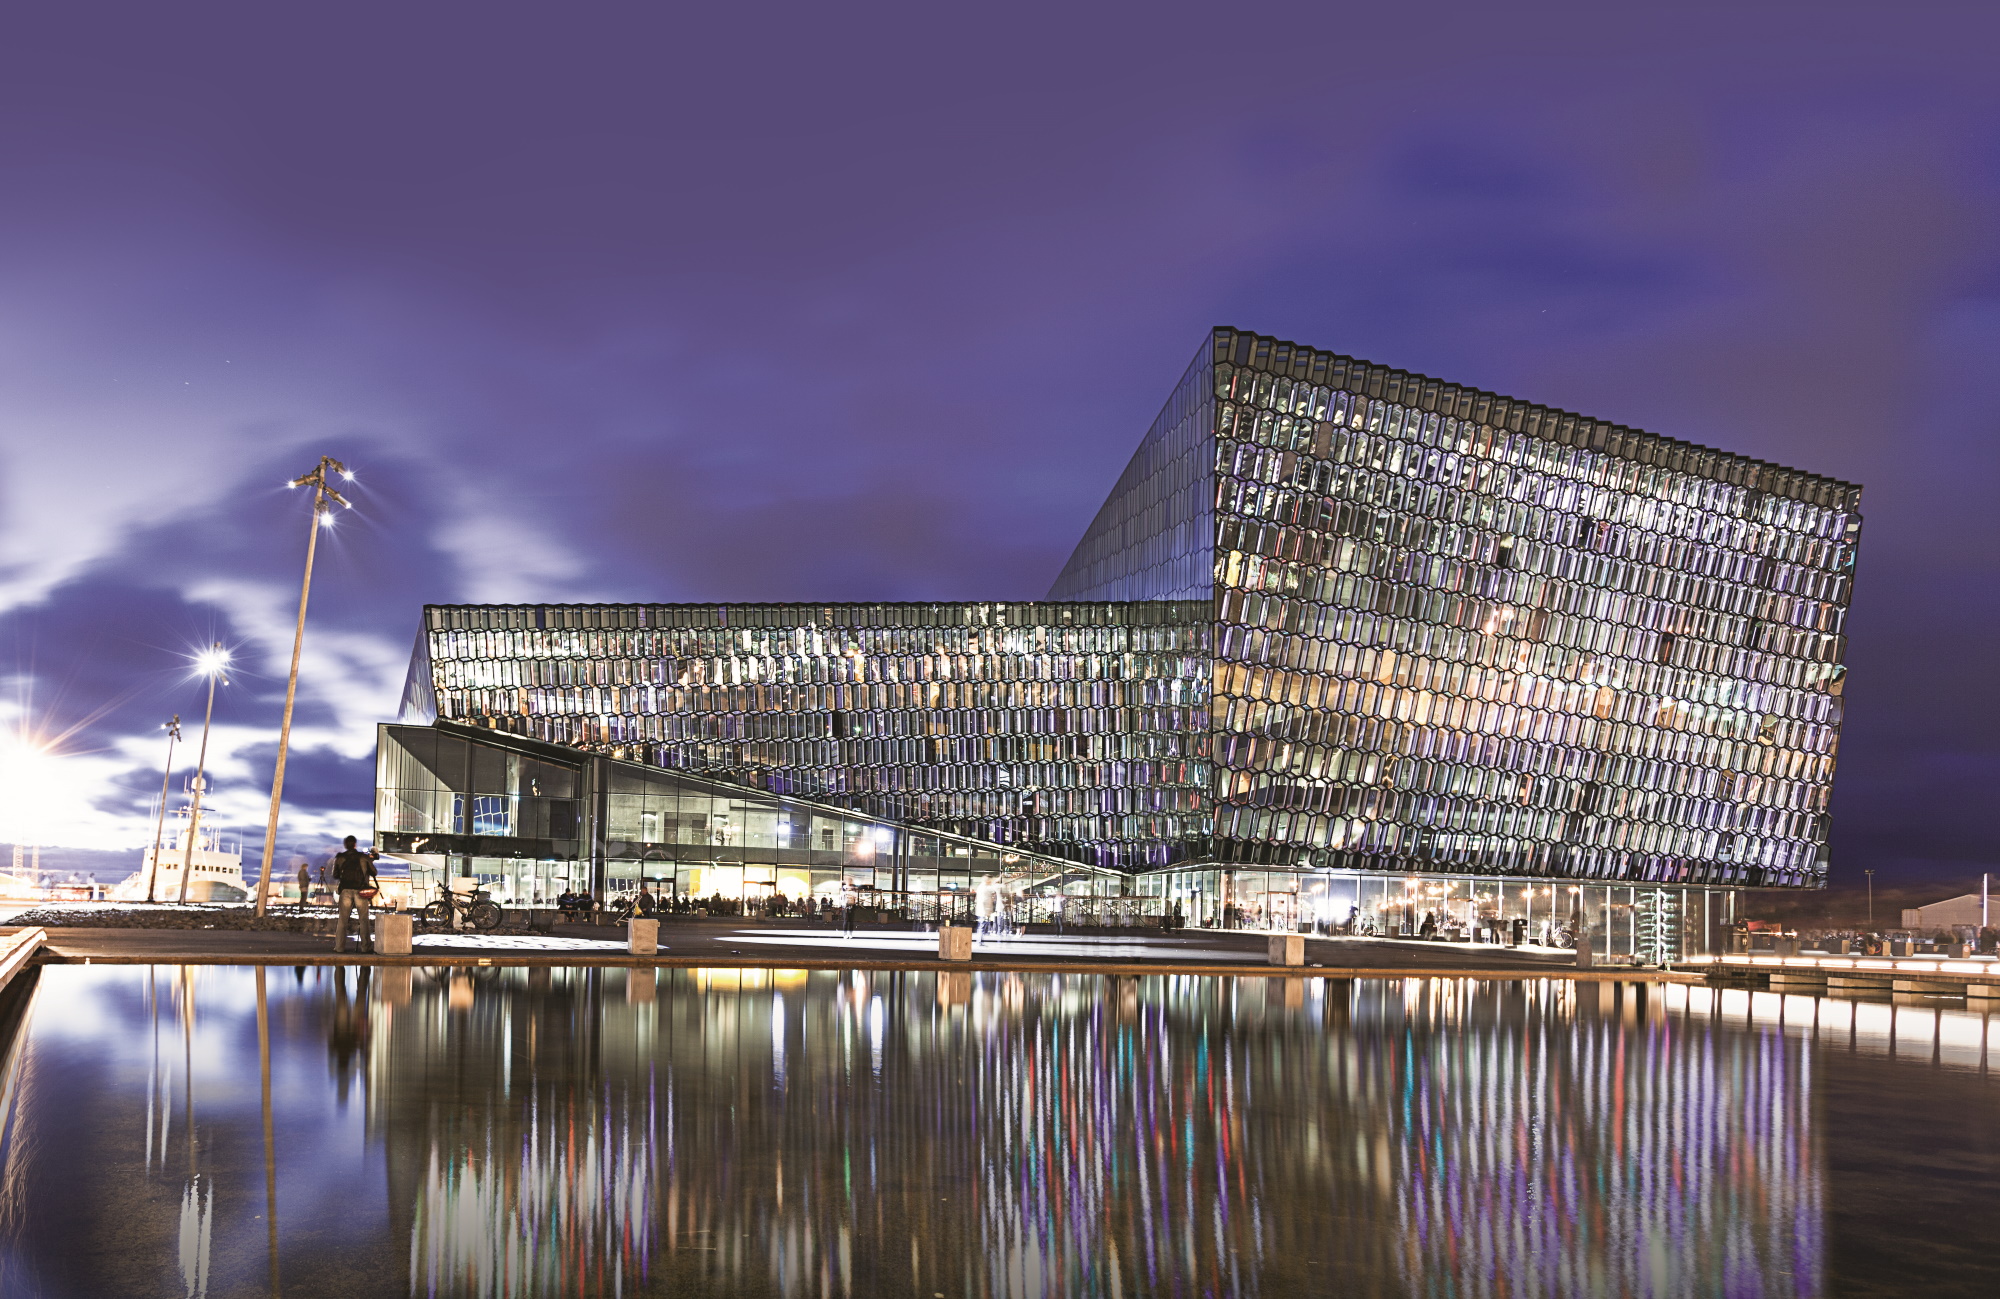 The Harpa Concert Hall.